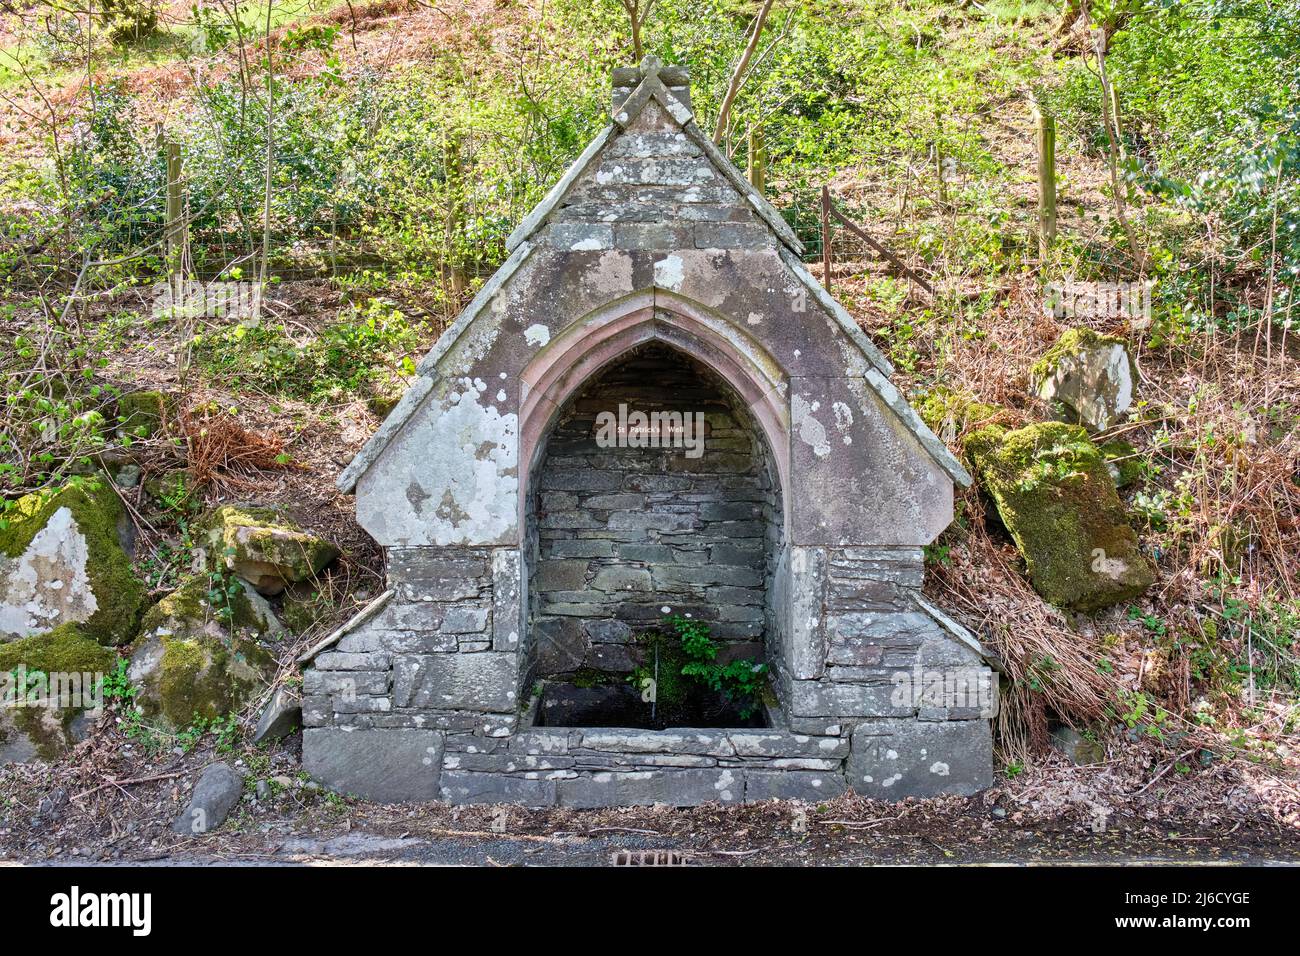 St Patrick's Well, Patterdale, Lake District, Cumbria Stock Photo